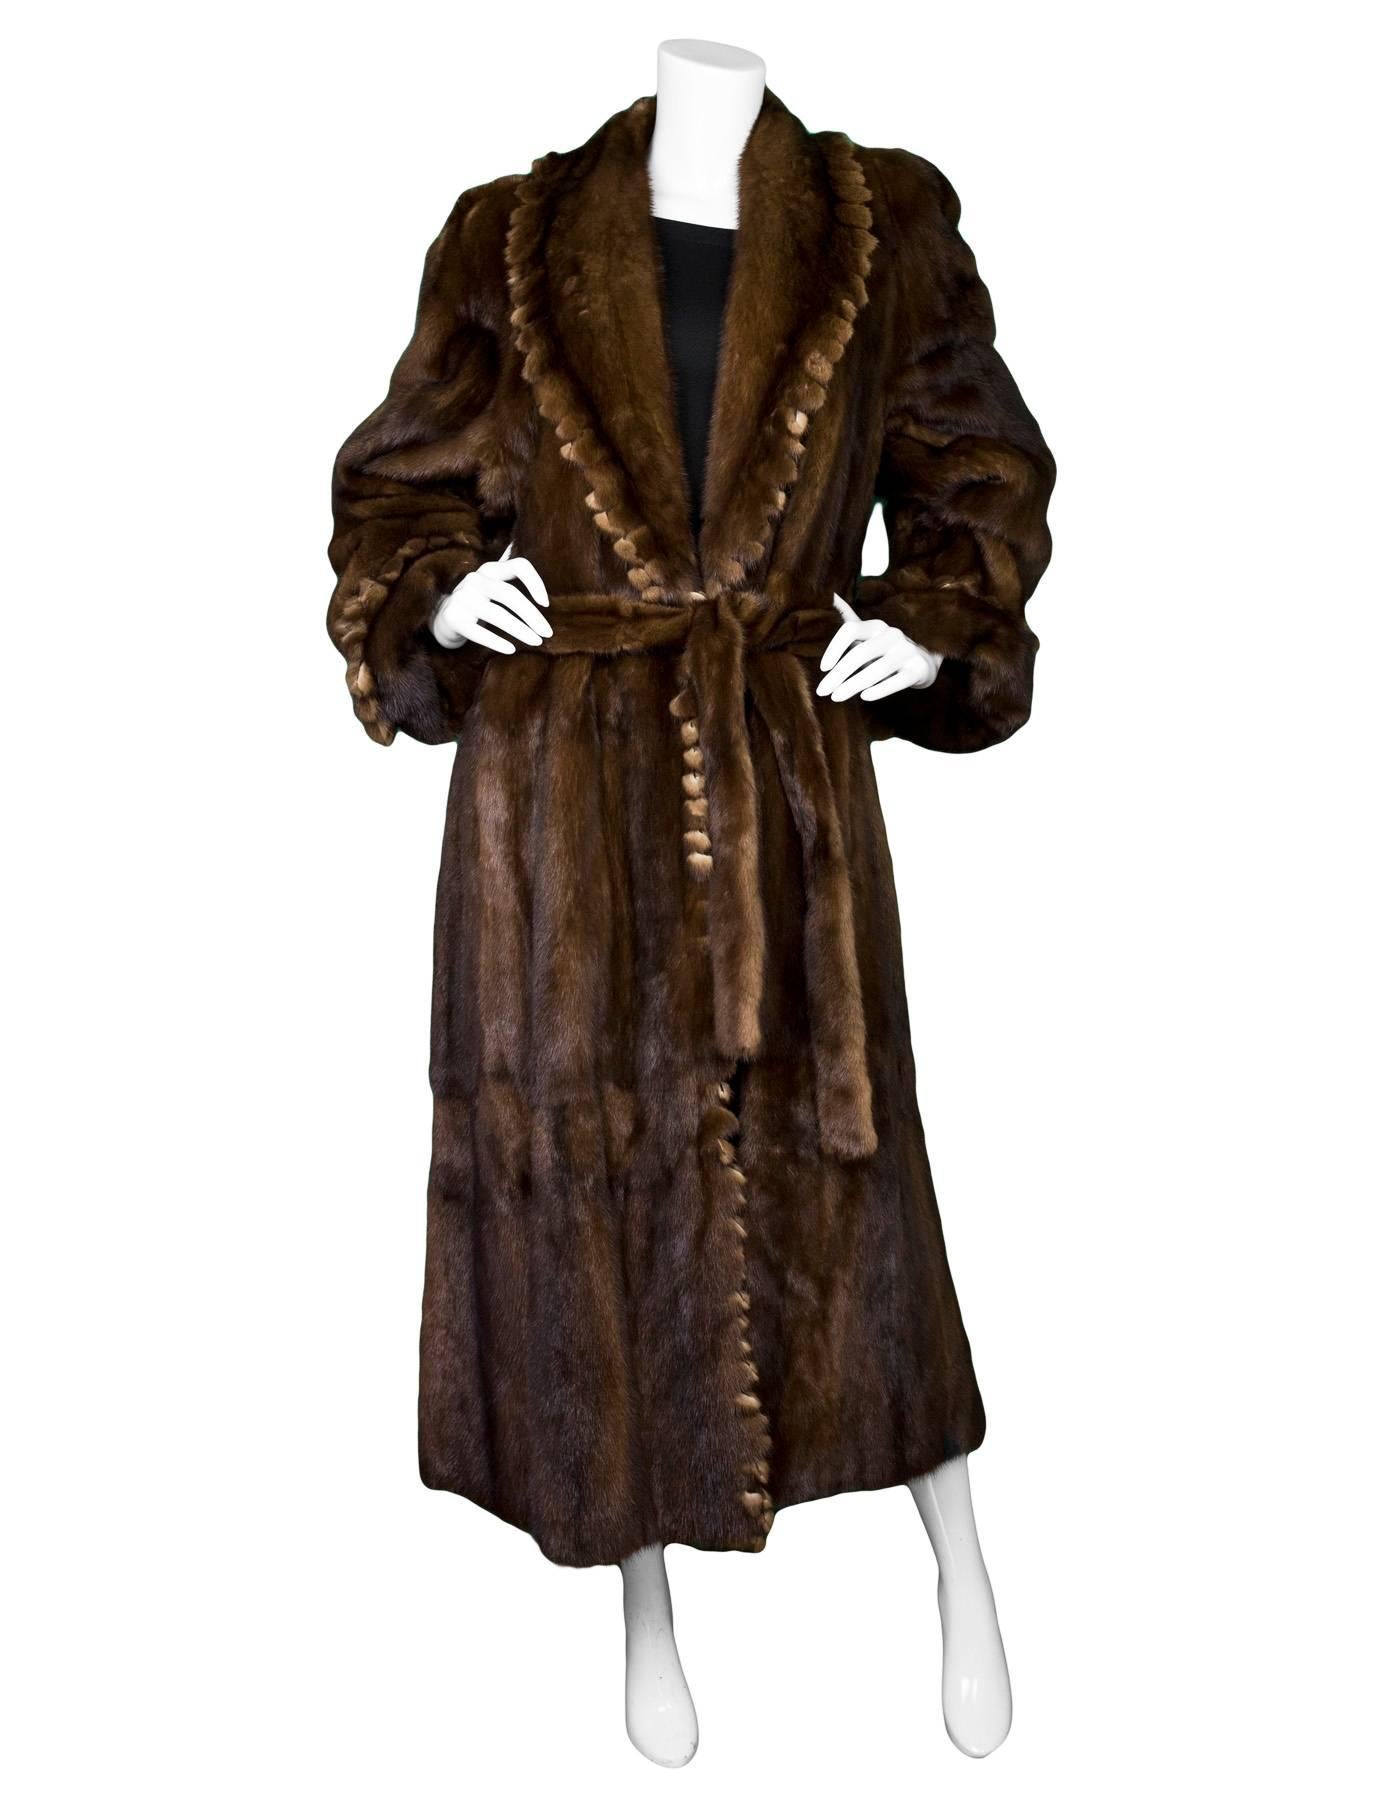 Adolfo Brown Long Mink Coat Sz 8

Color: Brown
Composition: Mink fur
Lining: Brown textile
Closure/Opening: tie at waist
Exterior Pockets: Two hip pockets
Interior Pockets: None
Overall Condition: Excellent pre-owned condition, some wear at